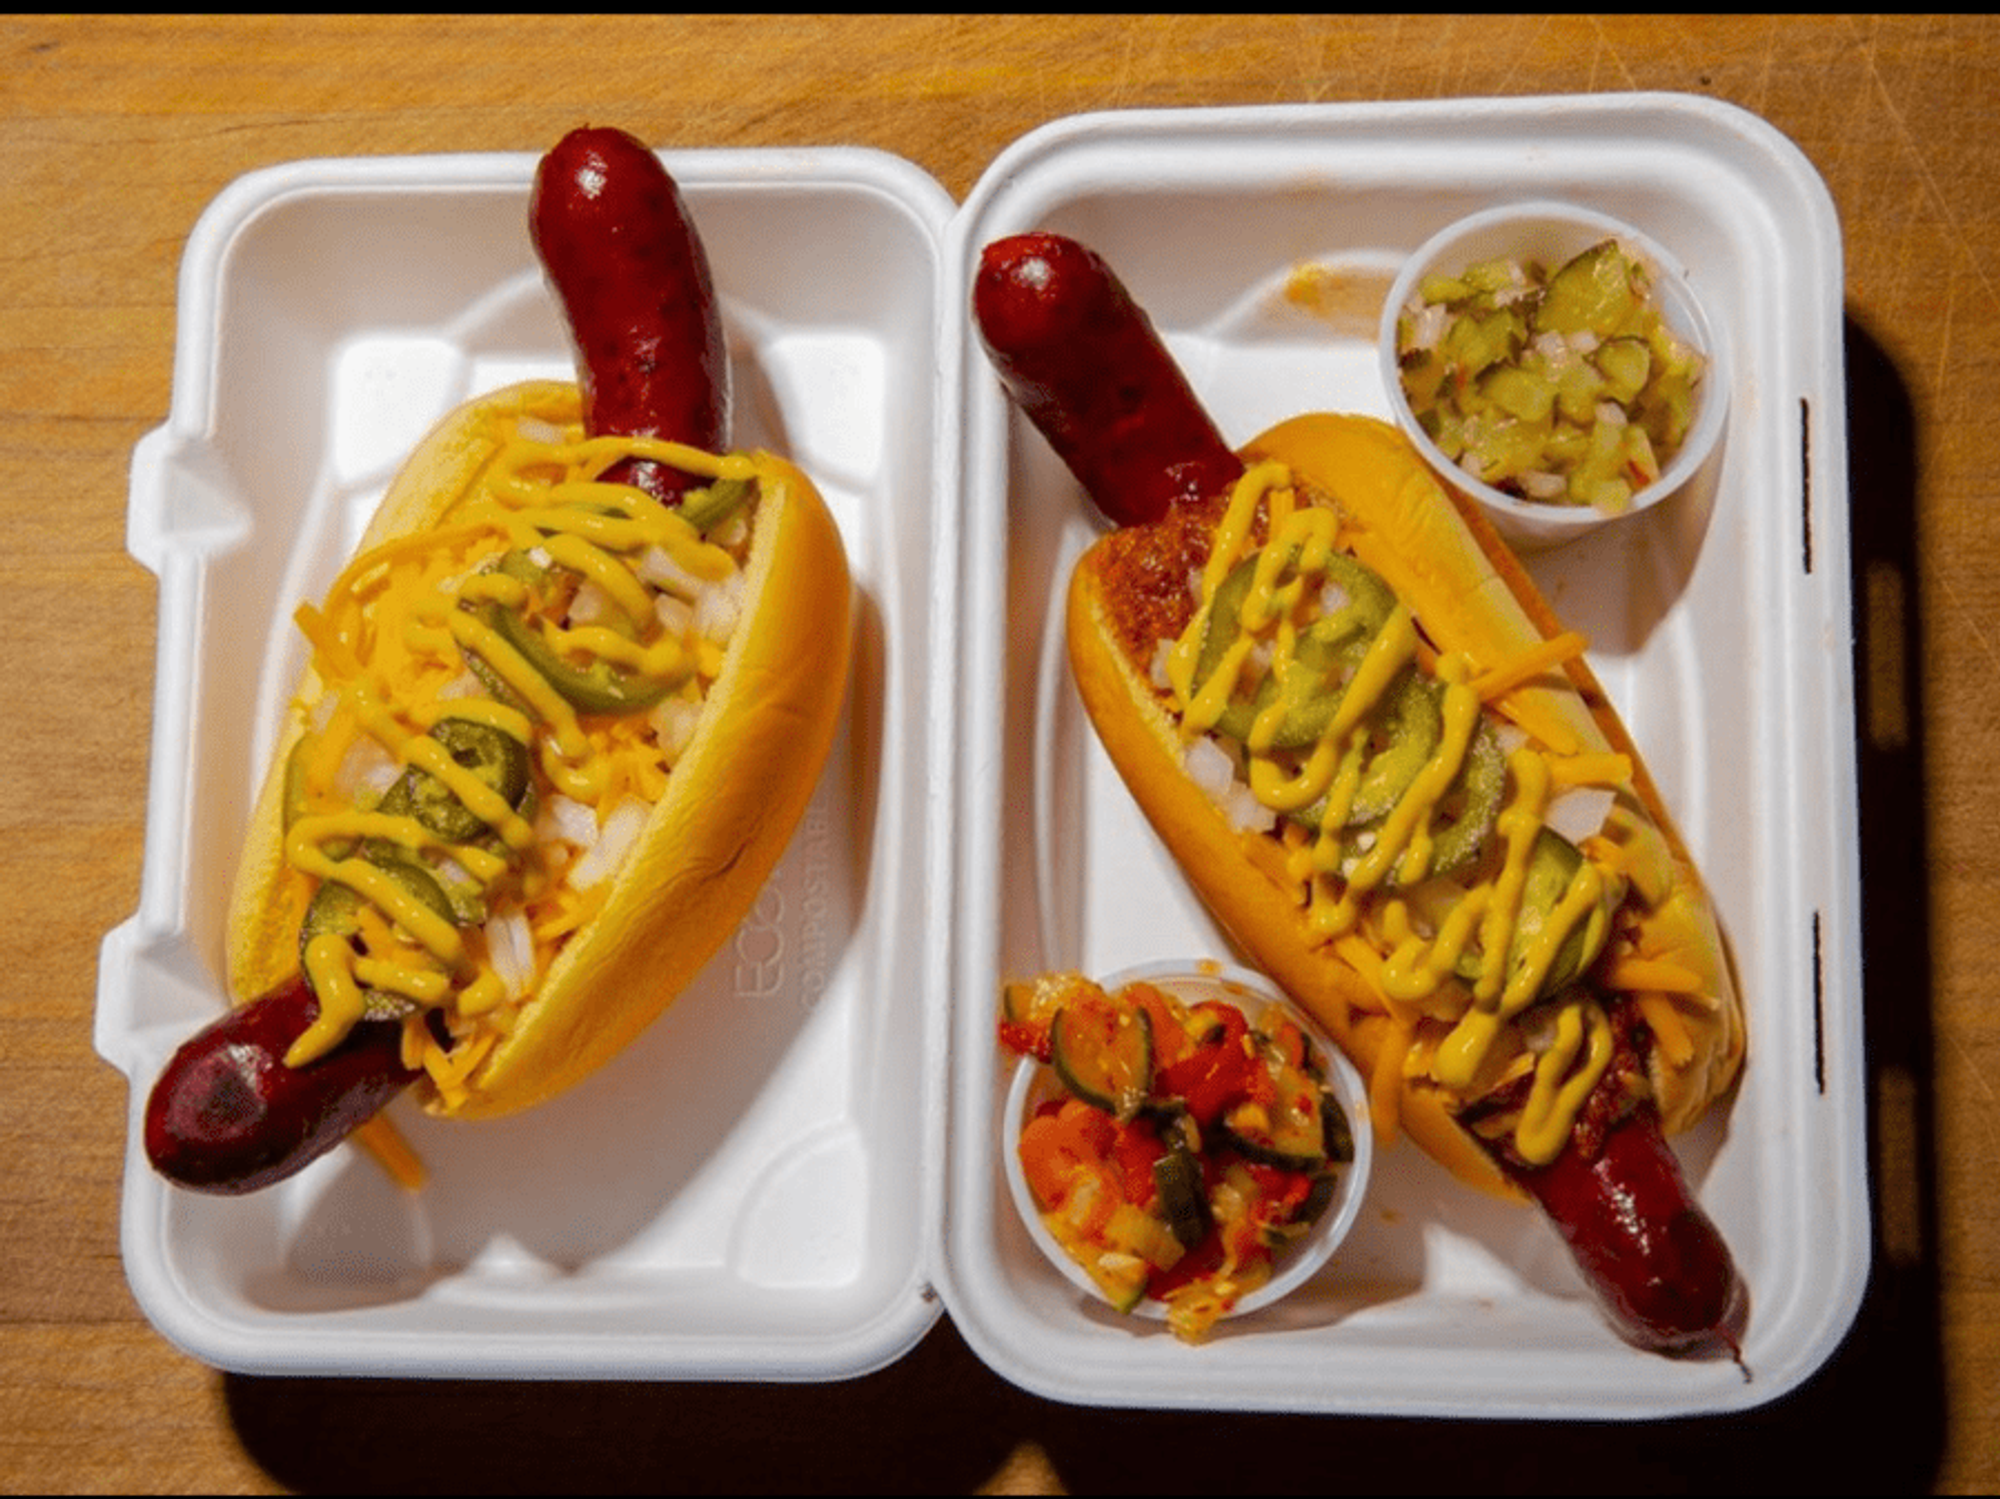 La Barbecue Red Rocket Hot Dogs